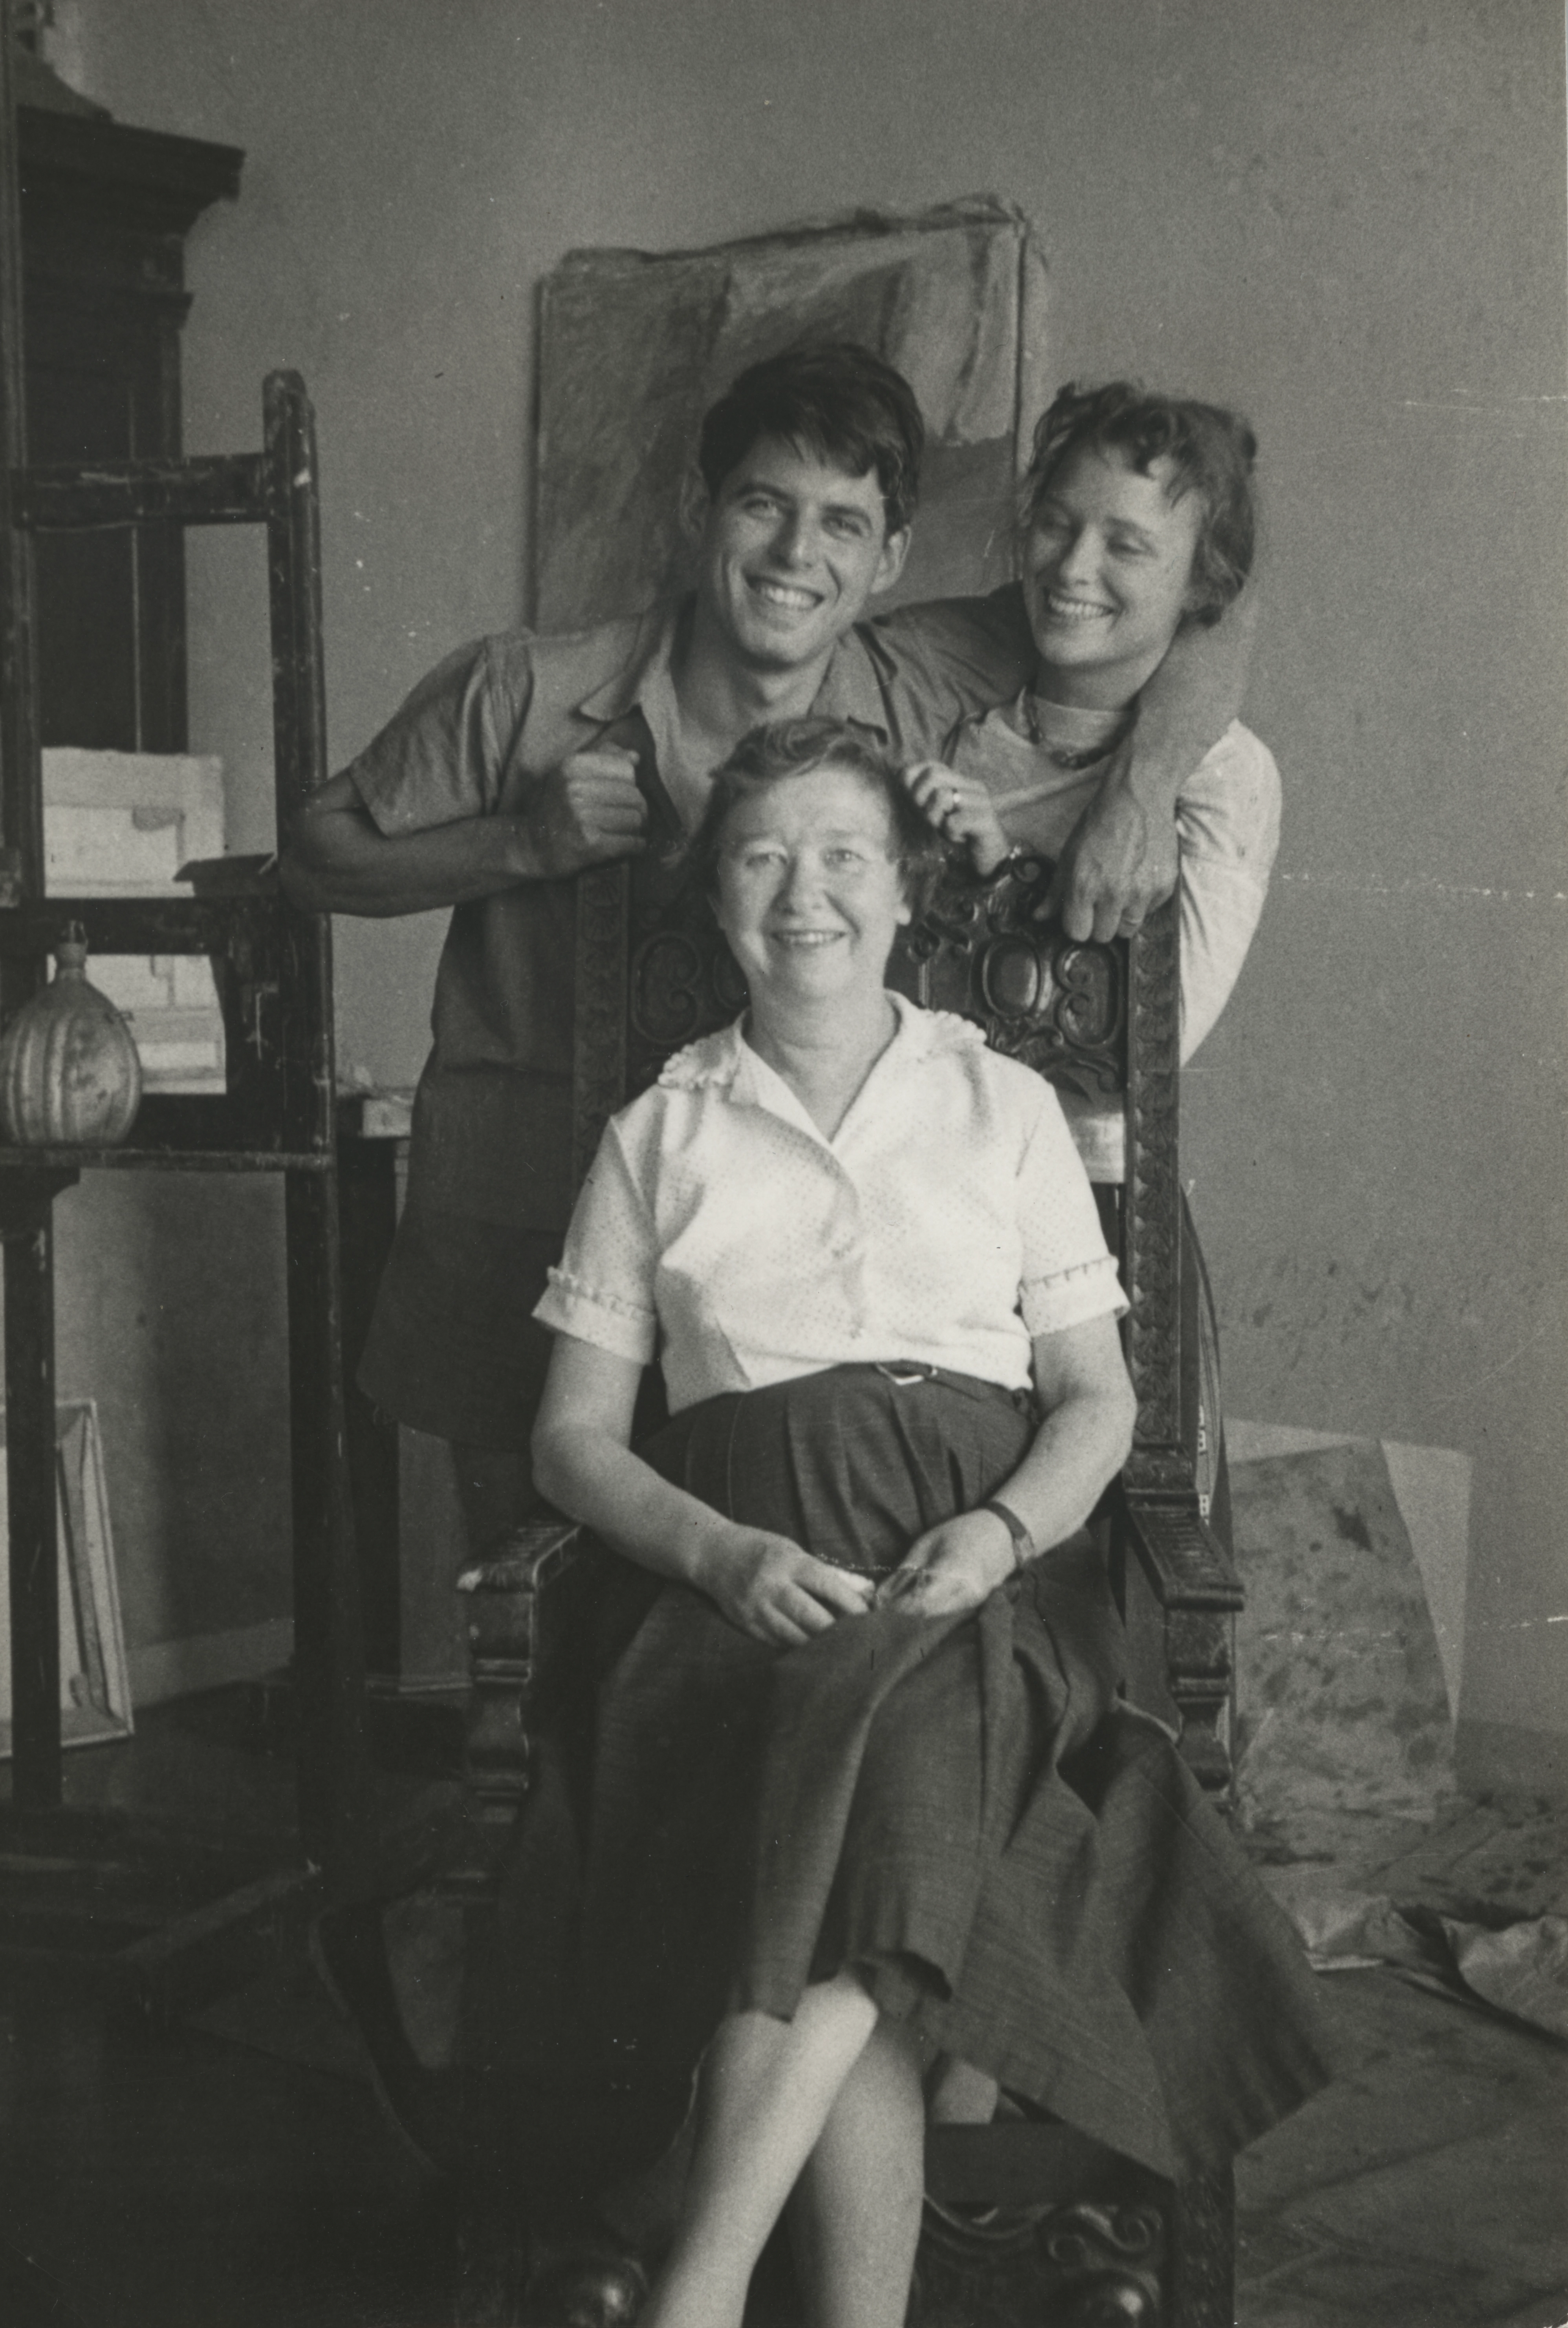 Black and white photograph from 1958 of three people with light skin tones; a younger man and younger woman, standing behind a chair, and an older woman seated in front of them. All three are smiling.